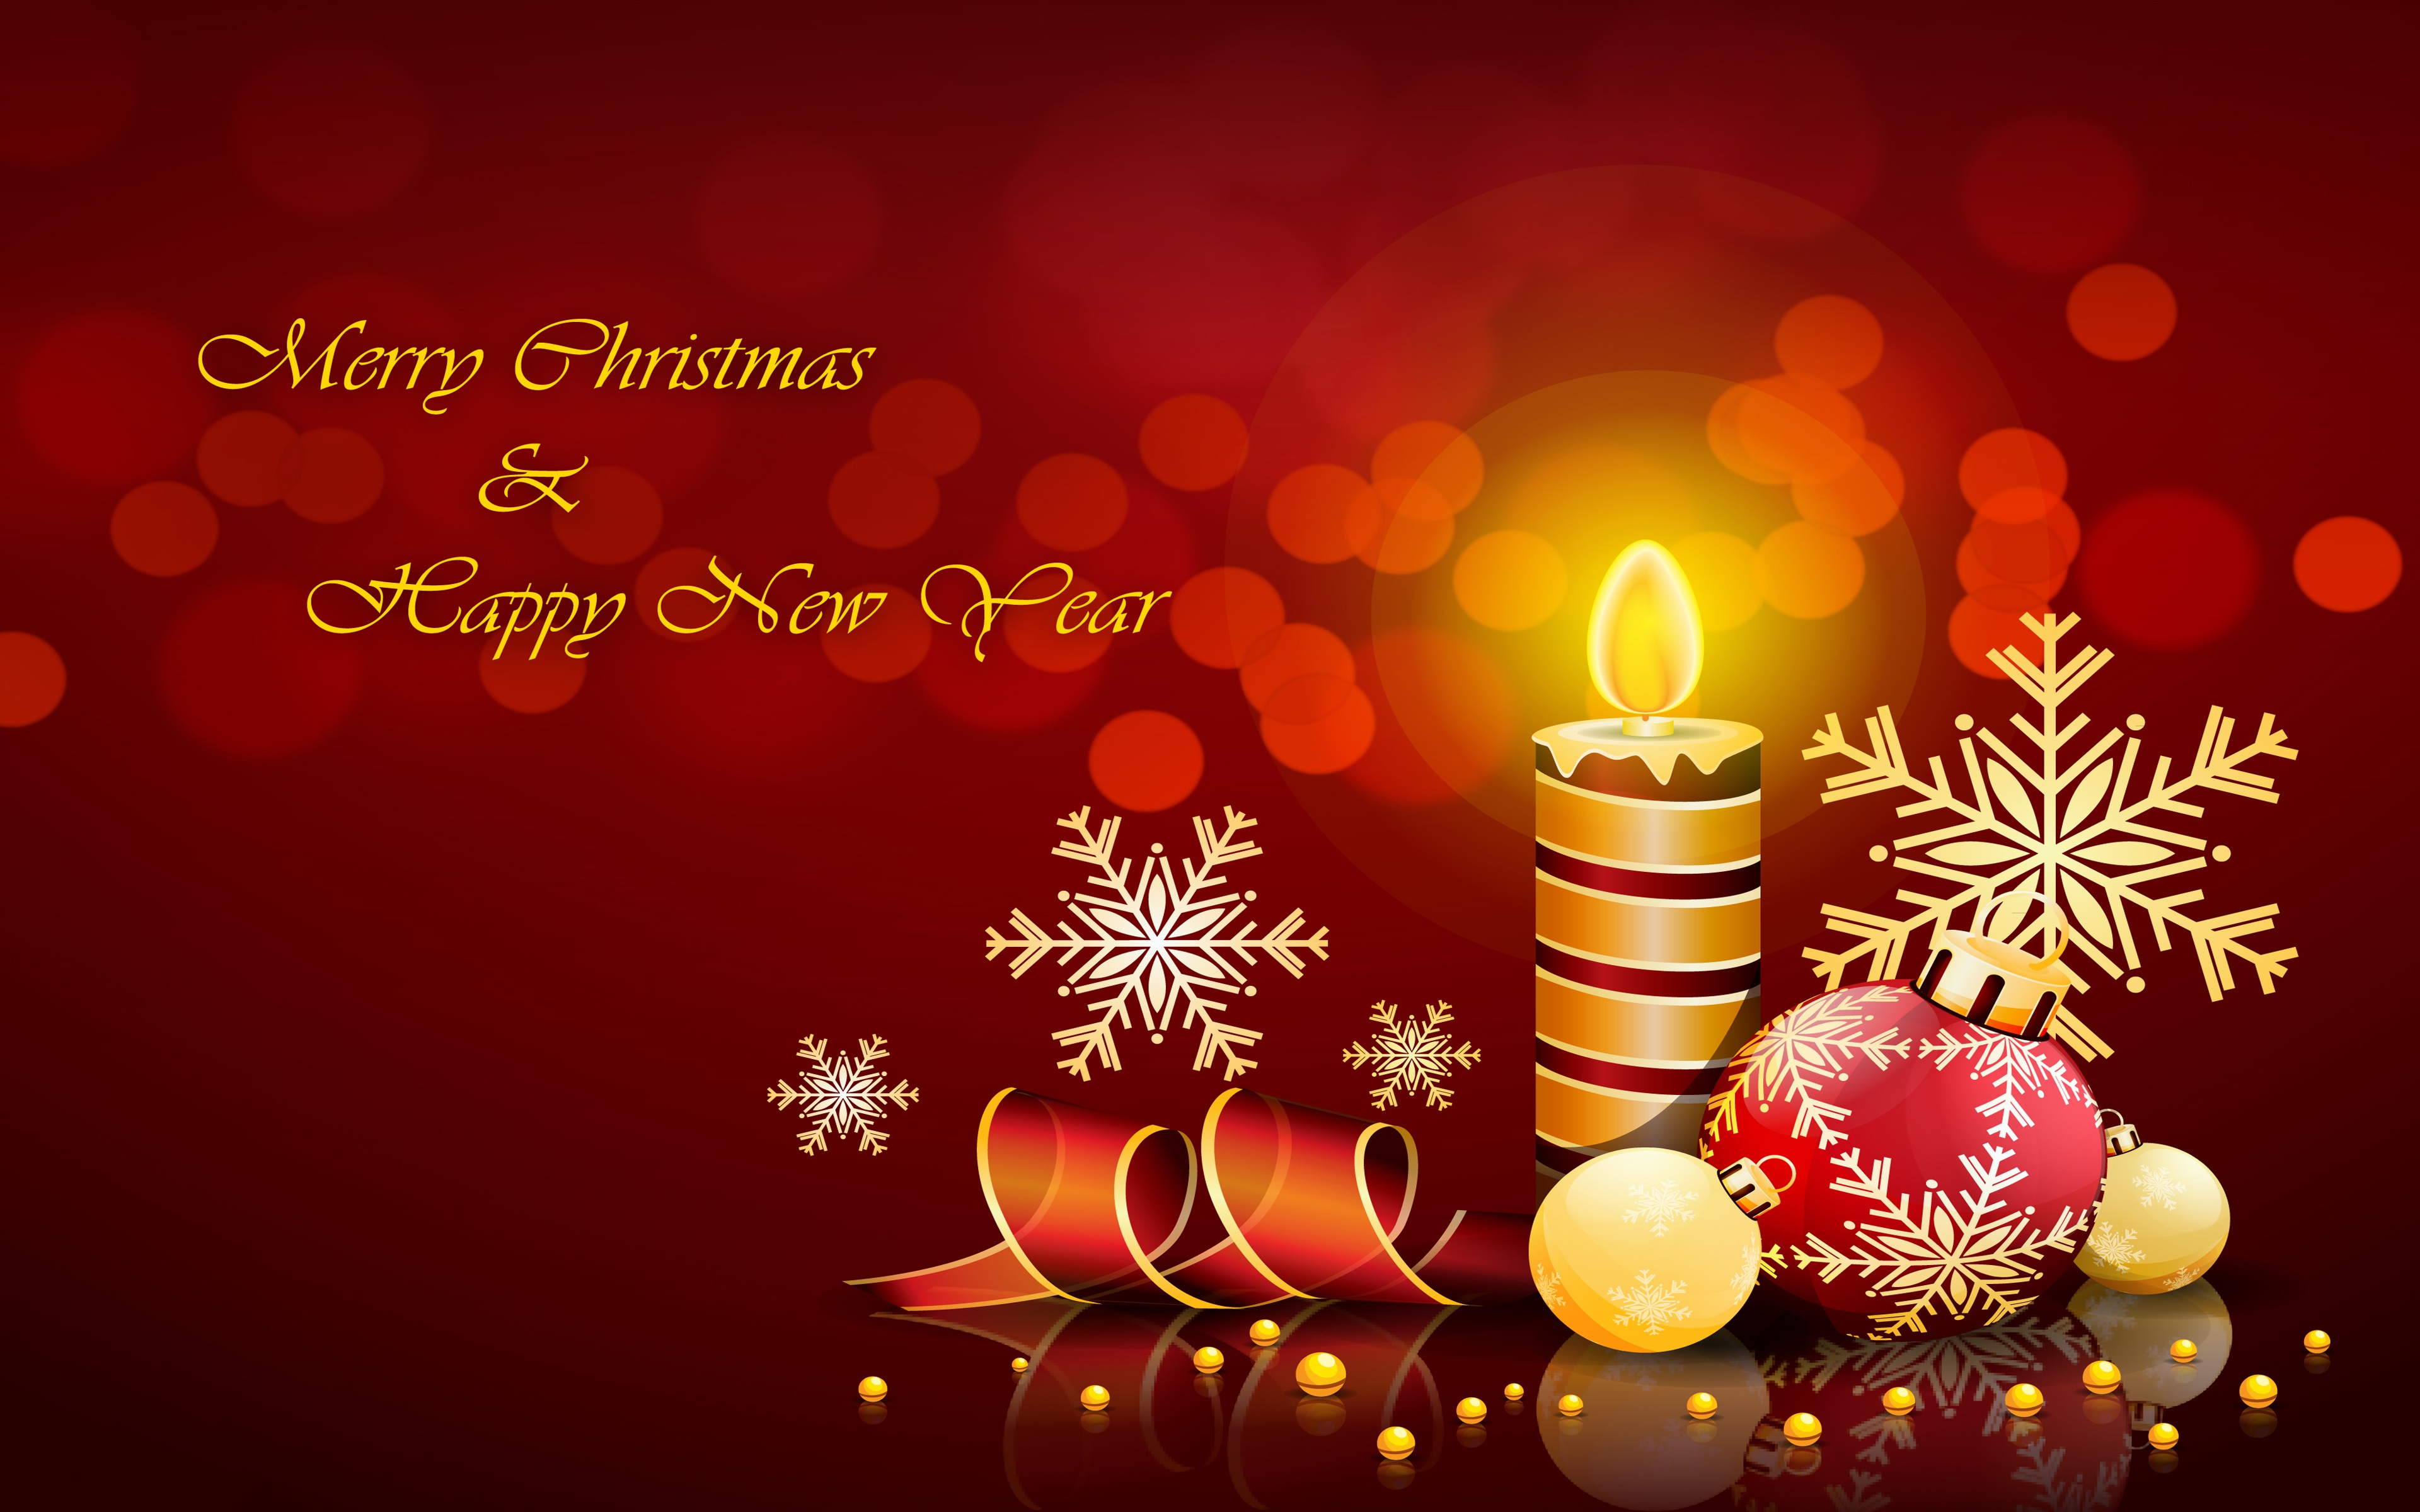 Merry Christmas And Happy New Year Decorative Candle Decorations